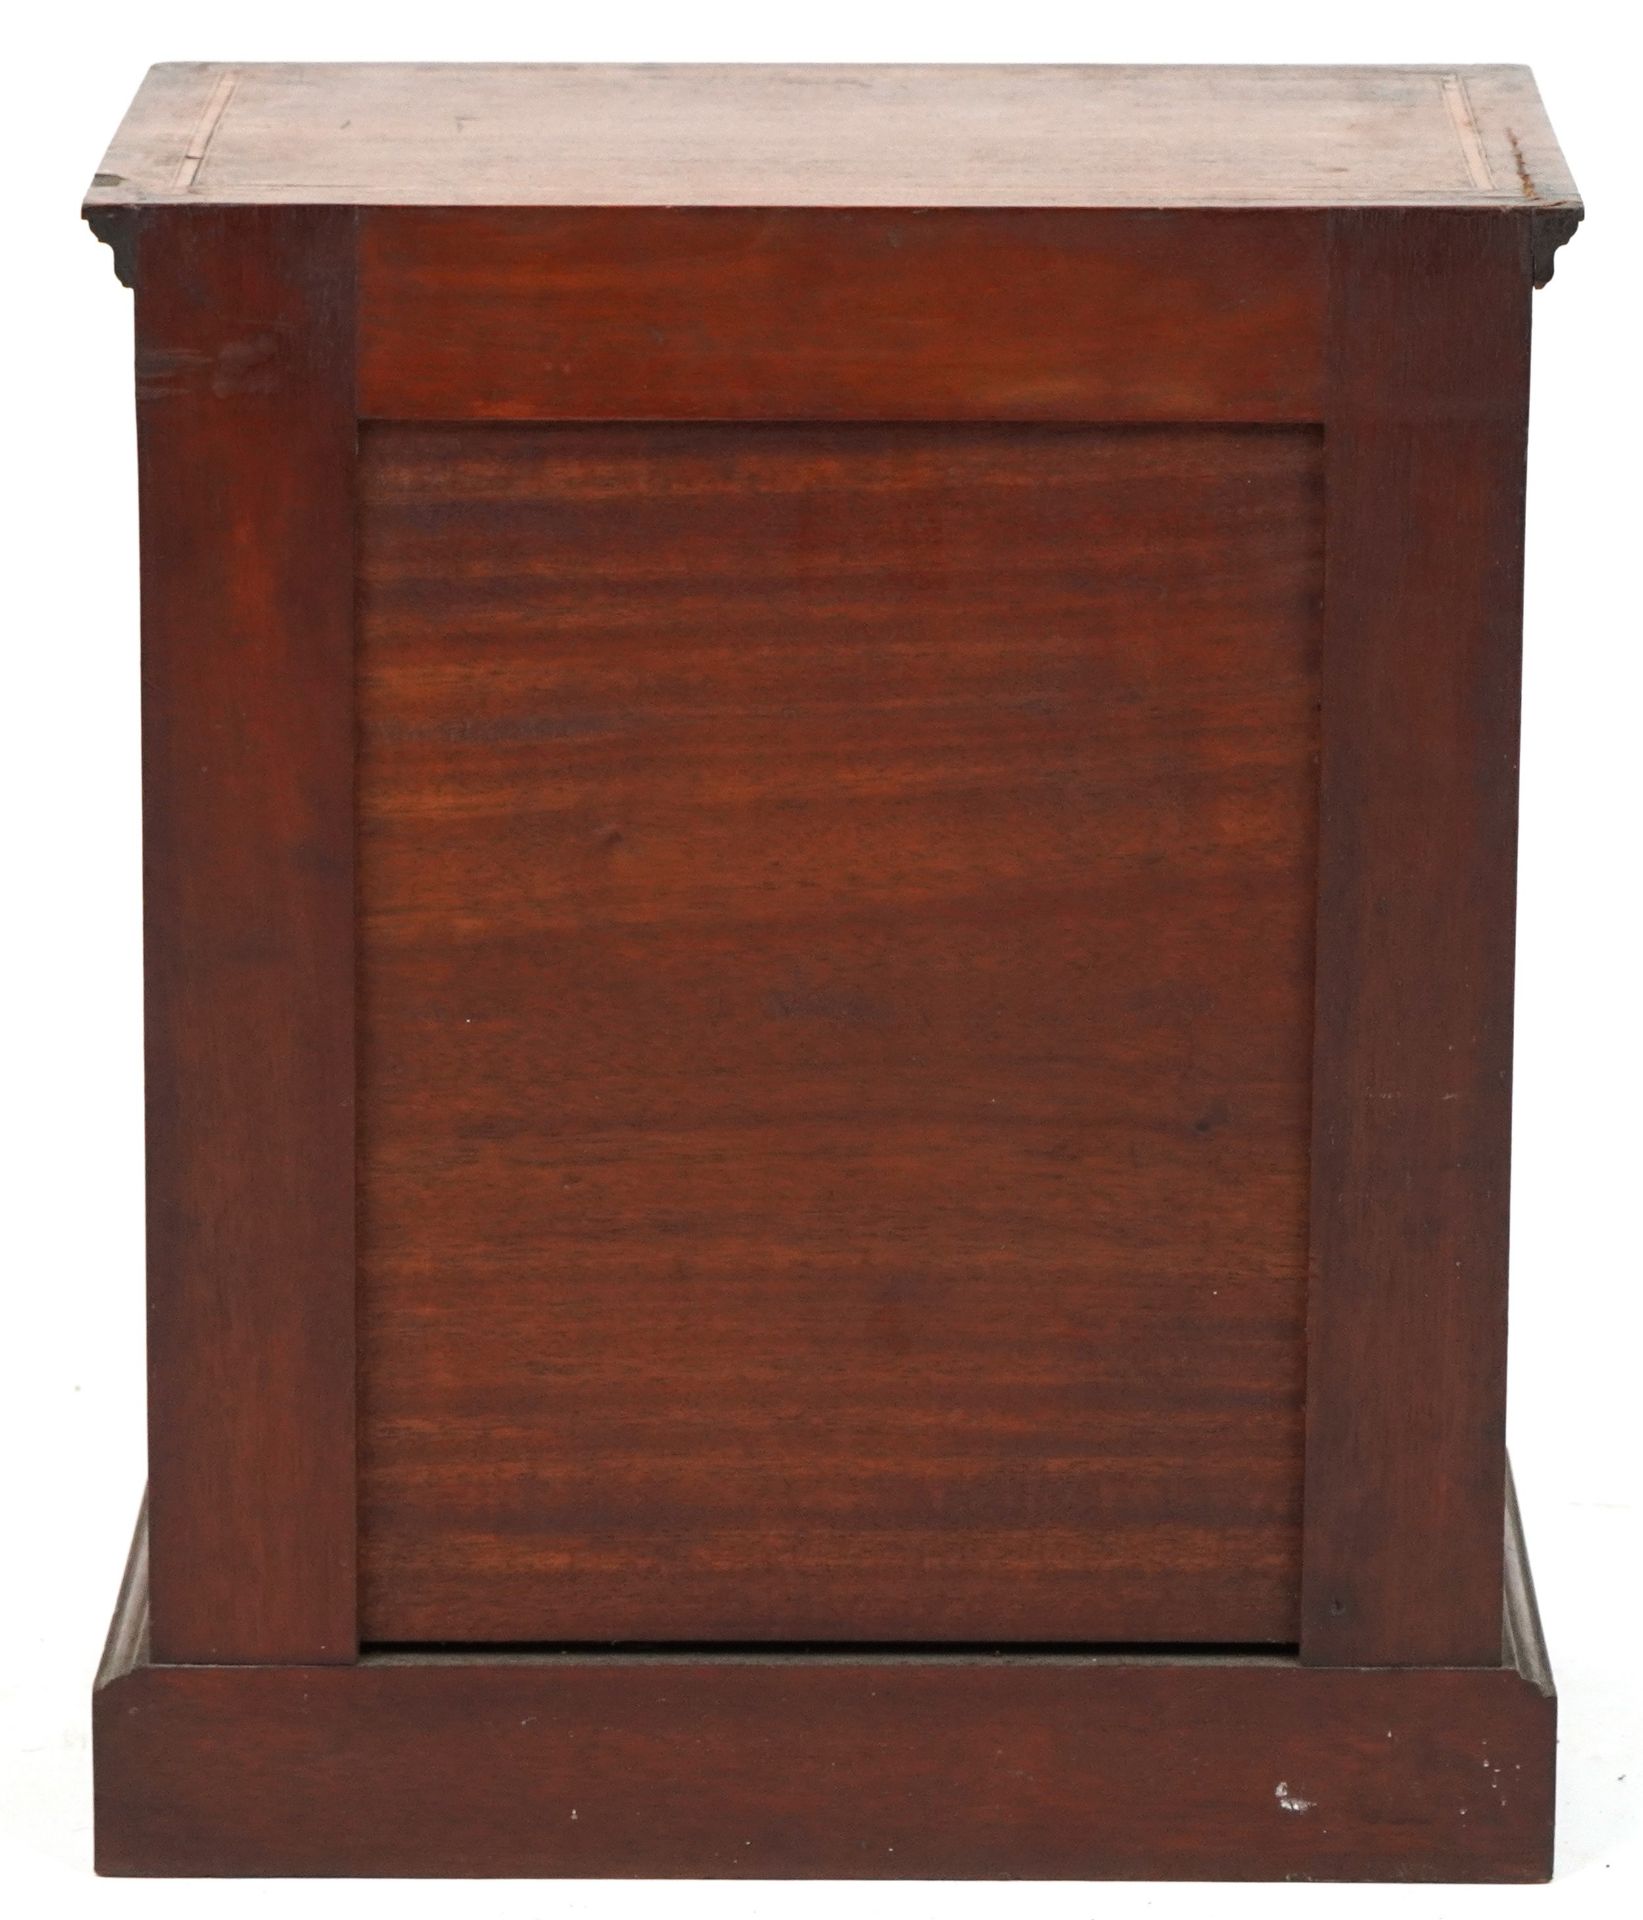 Early 20th century inlaid mahogany apprentice chest fitted with an arrangement of six drawers, - Image 4 of 4